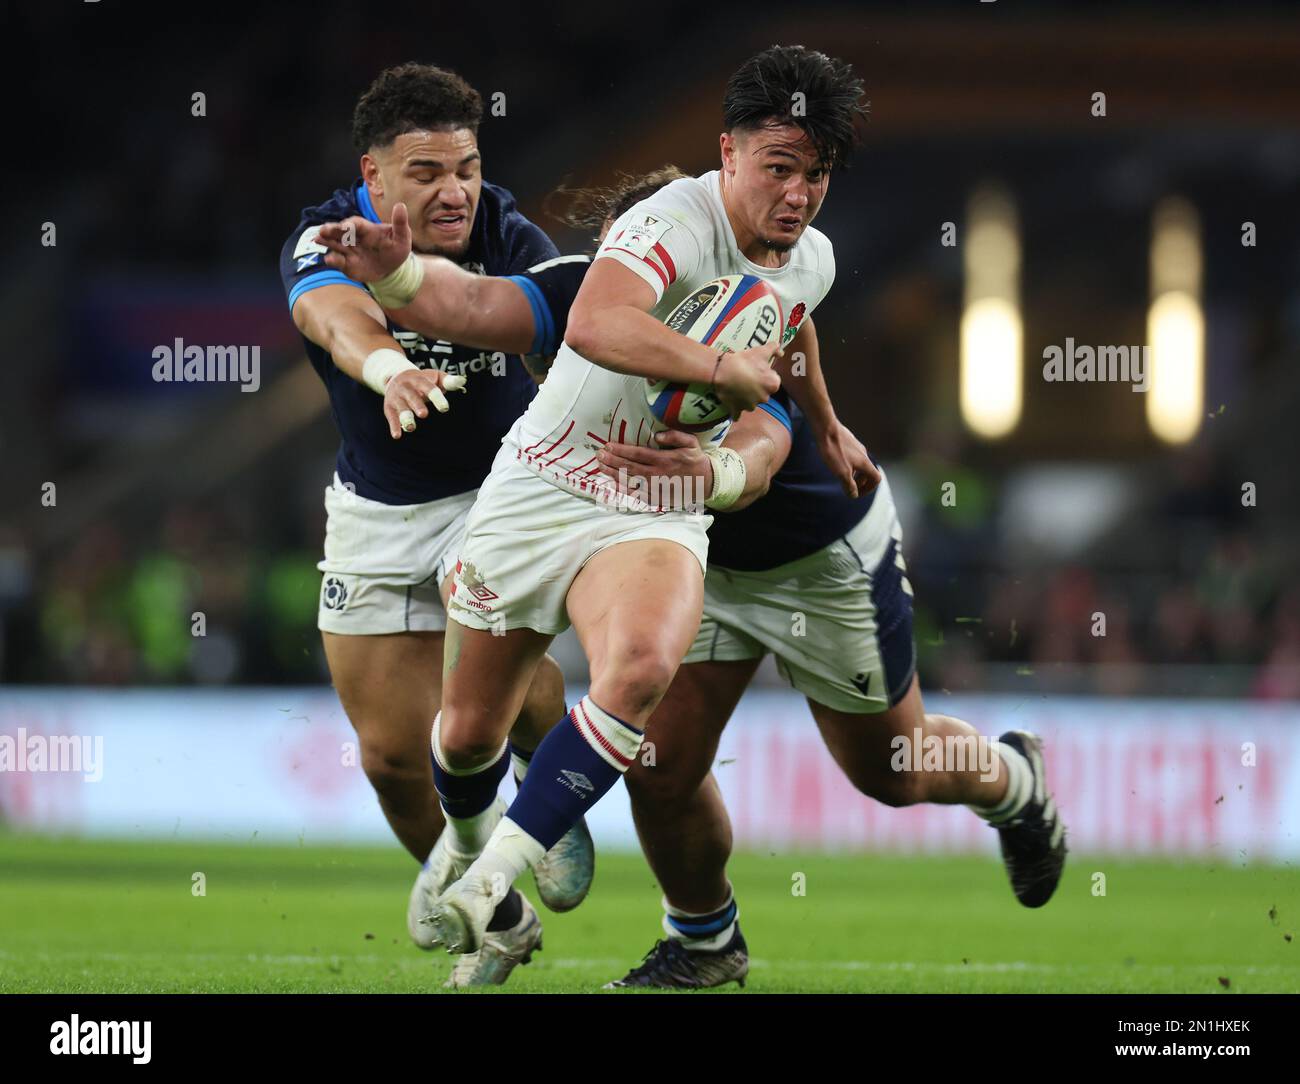 L-R Sione Tuipulotu of Scotland and England's Marcus Smithholds of Pierre Schoeman of Scotland  during the Guinness Six Nations Calcutta Cup match bet Stock Photo